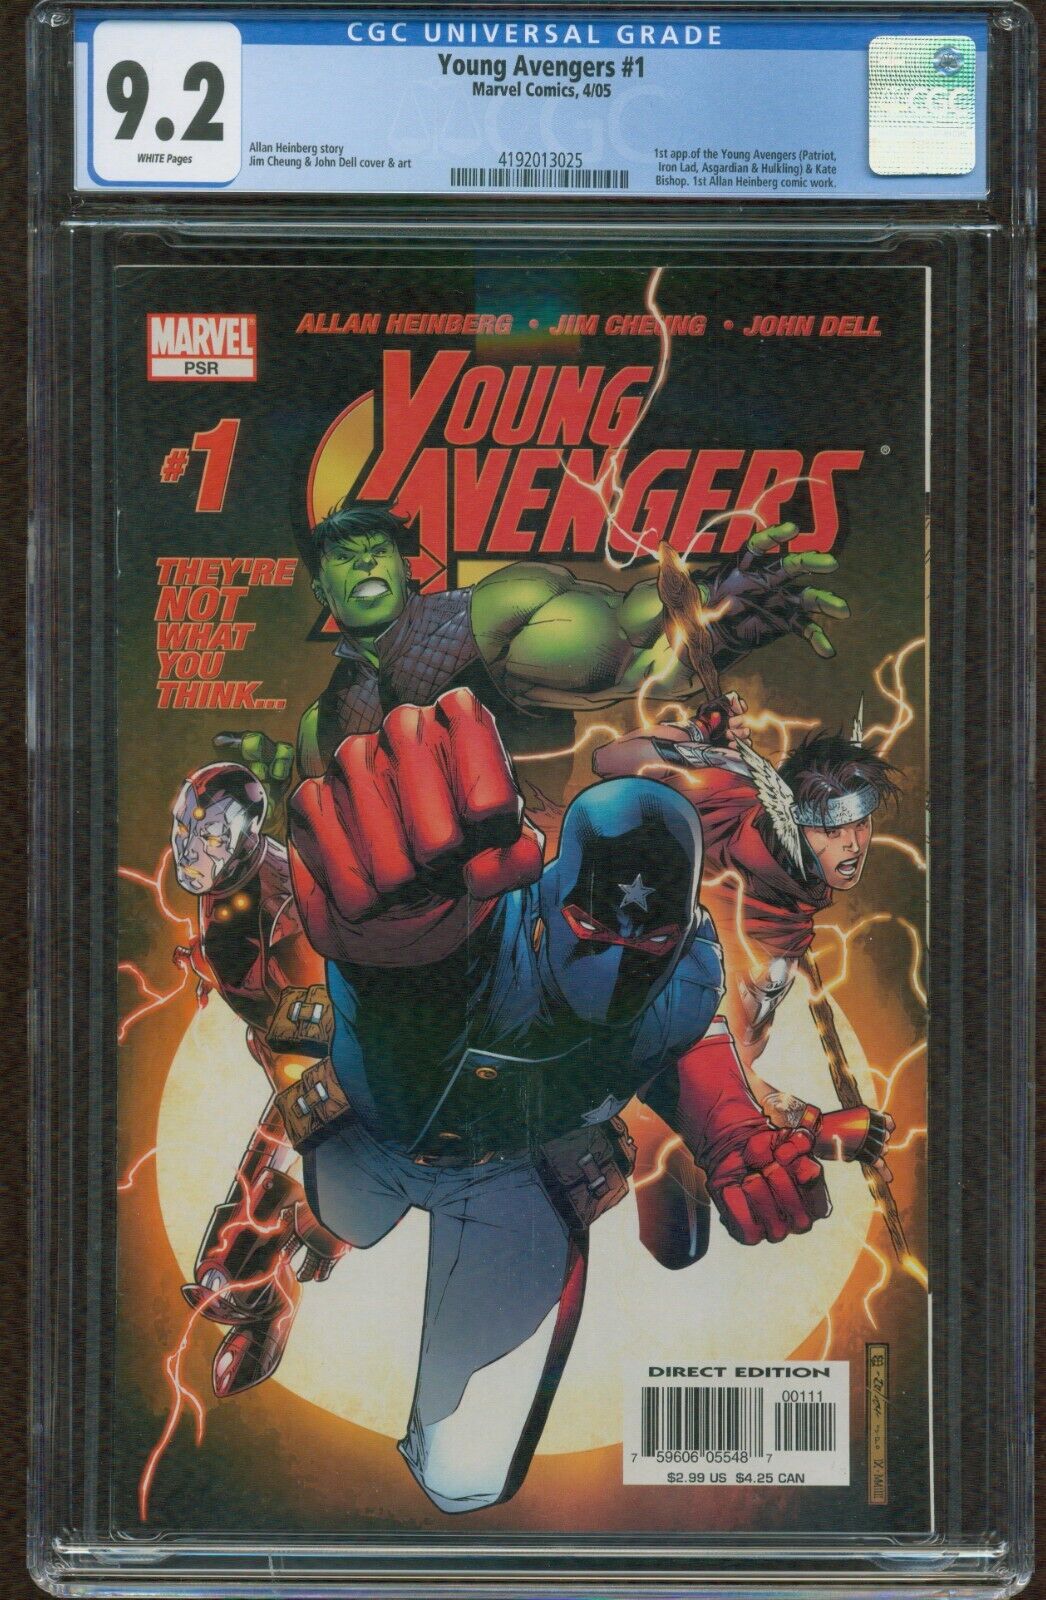 YOUNG AVENGERS #1 CGC 9.2 NM- (2005) 1st App. of the YOUNG AVENGERS ID: G-921